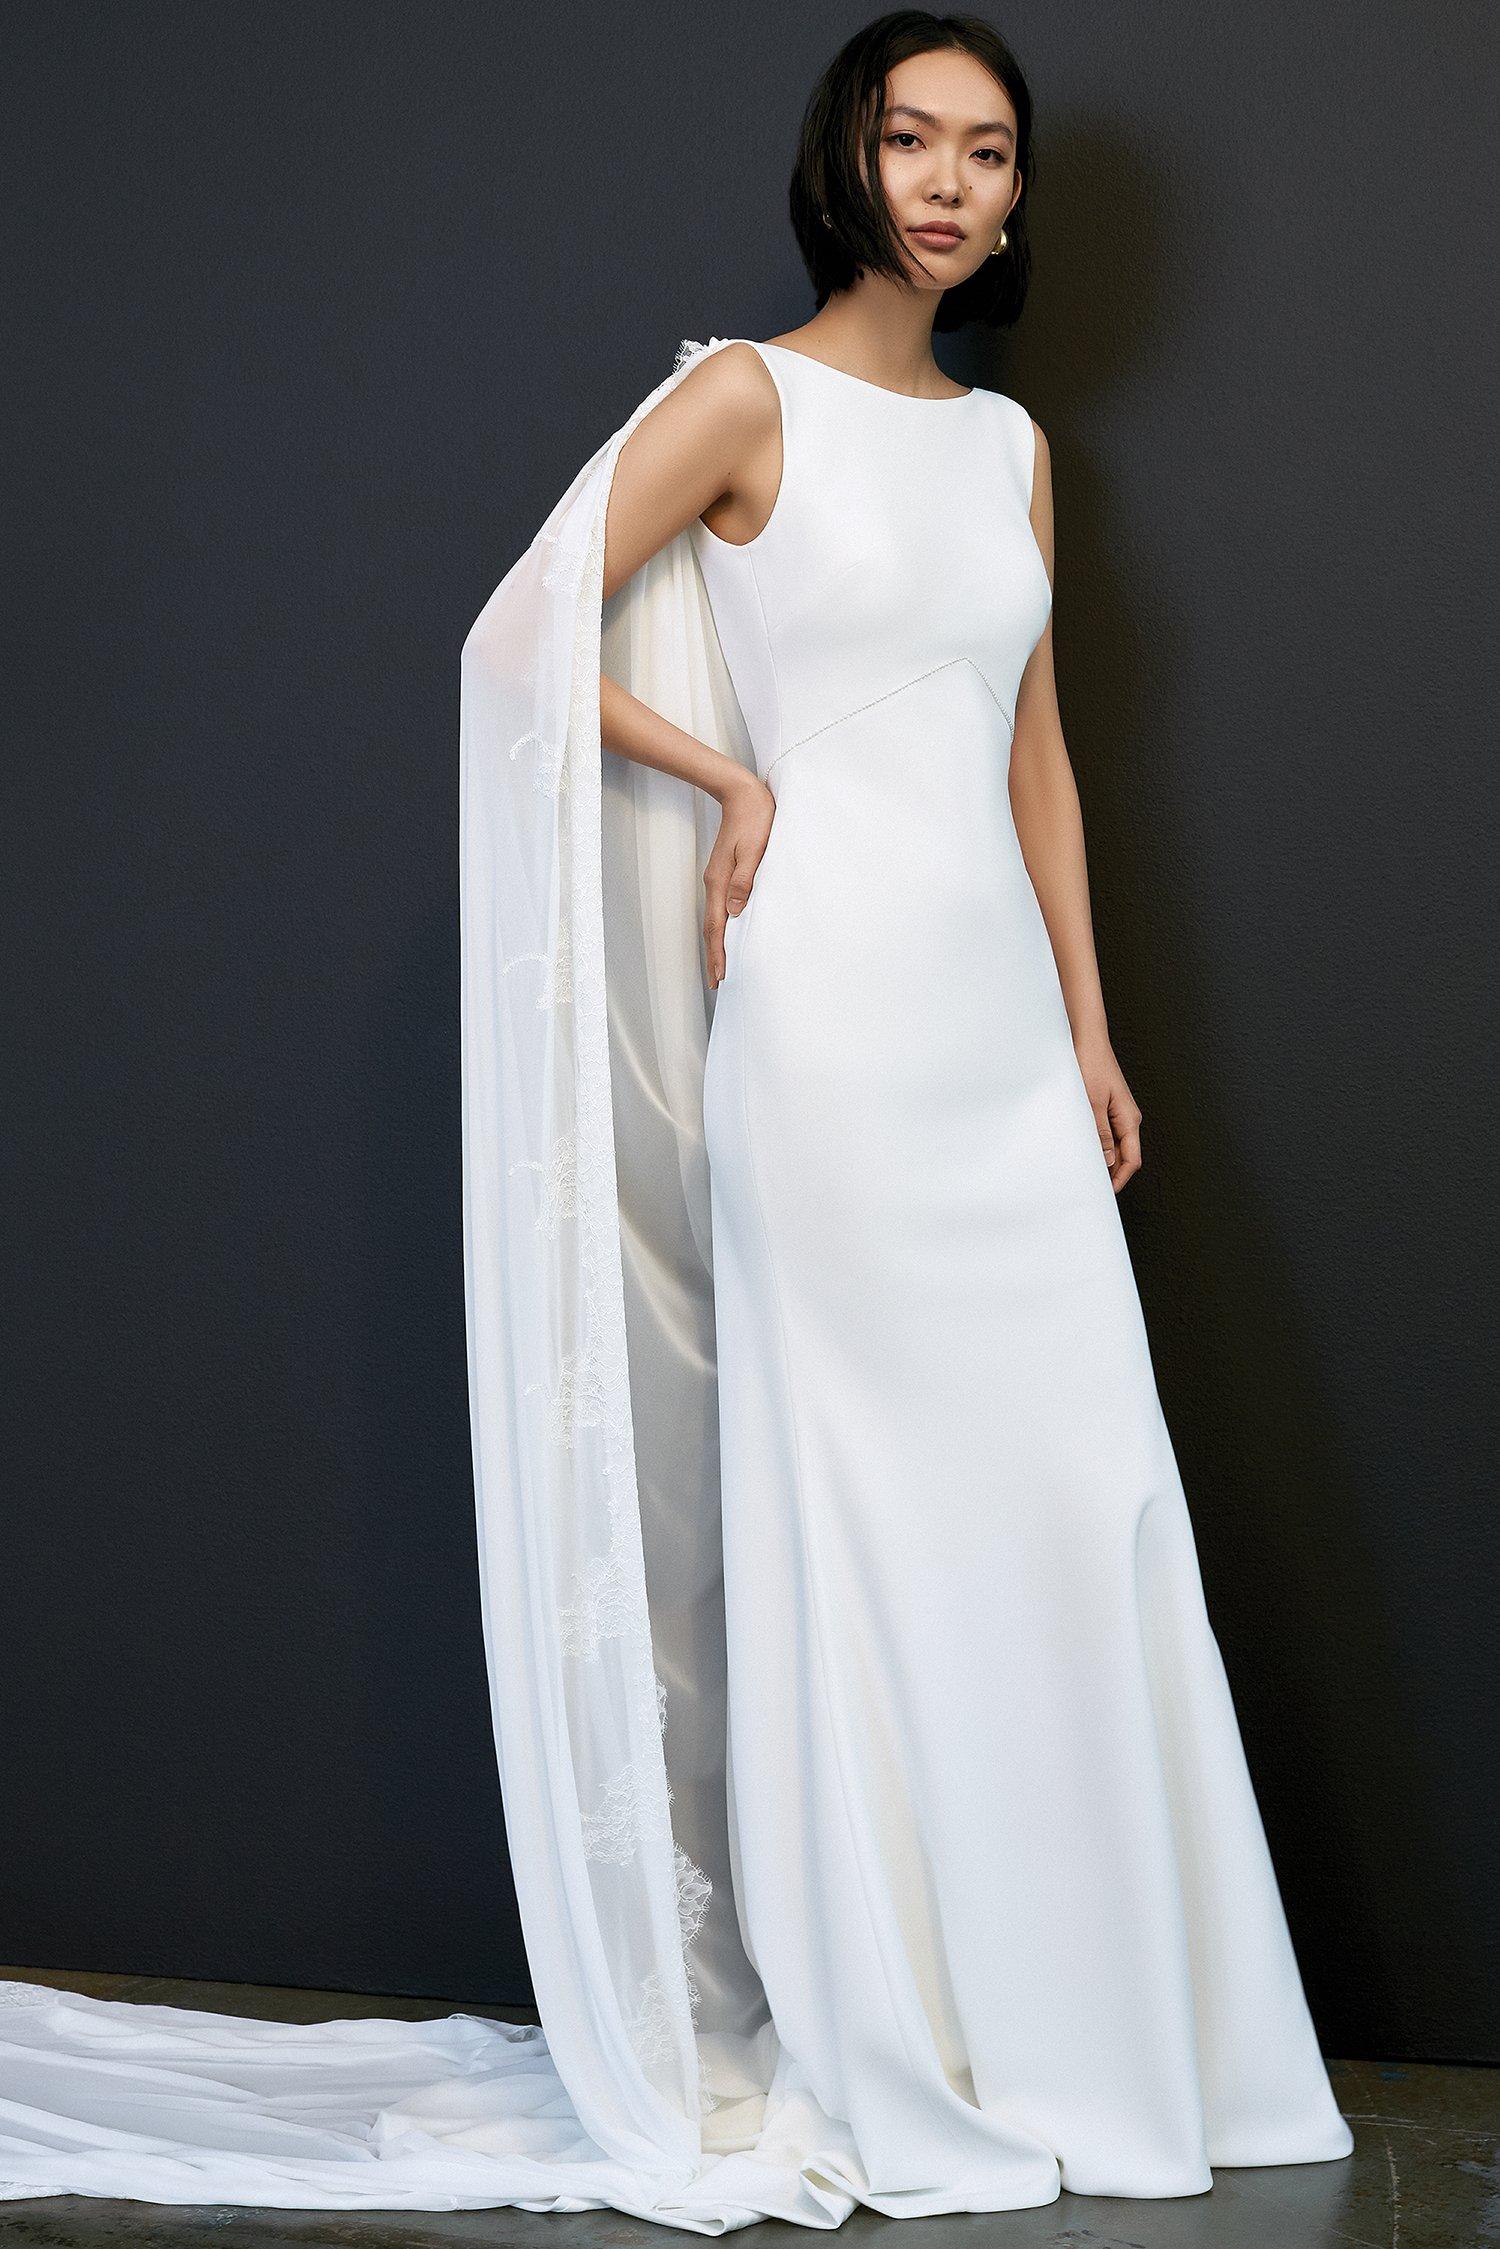 31 Minimalist Wedding Dresses That Are Simple and Understated